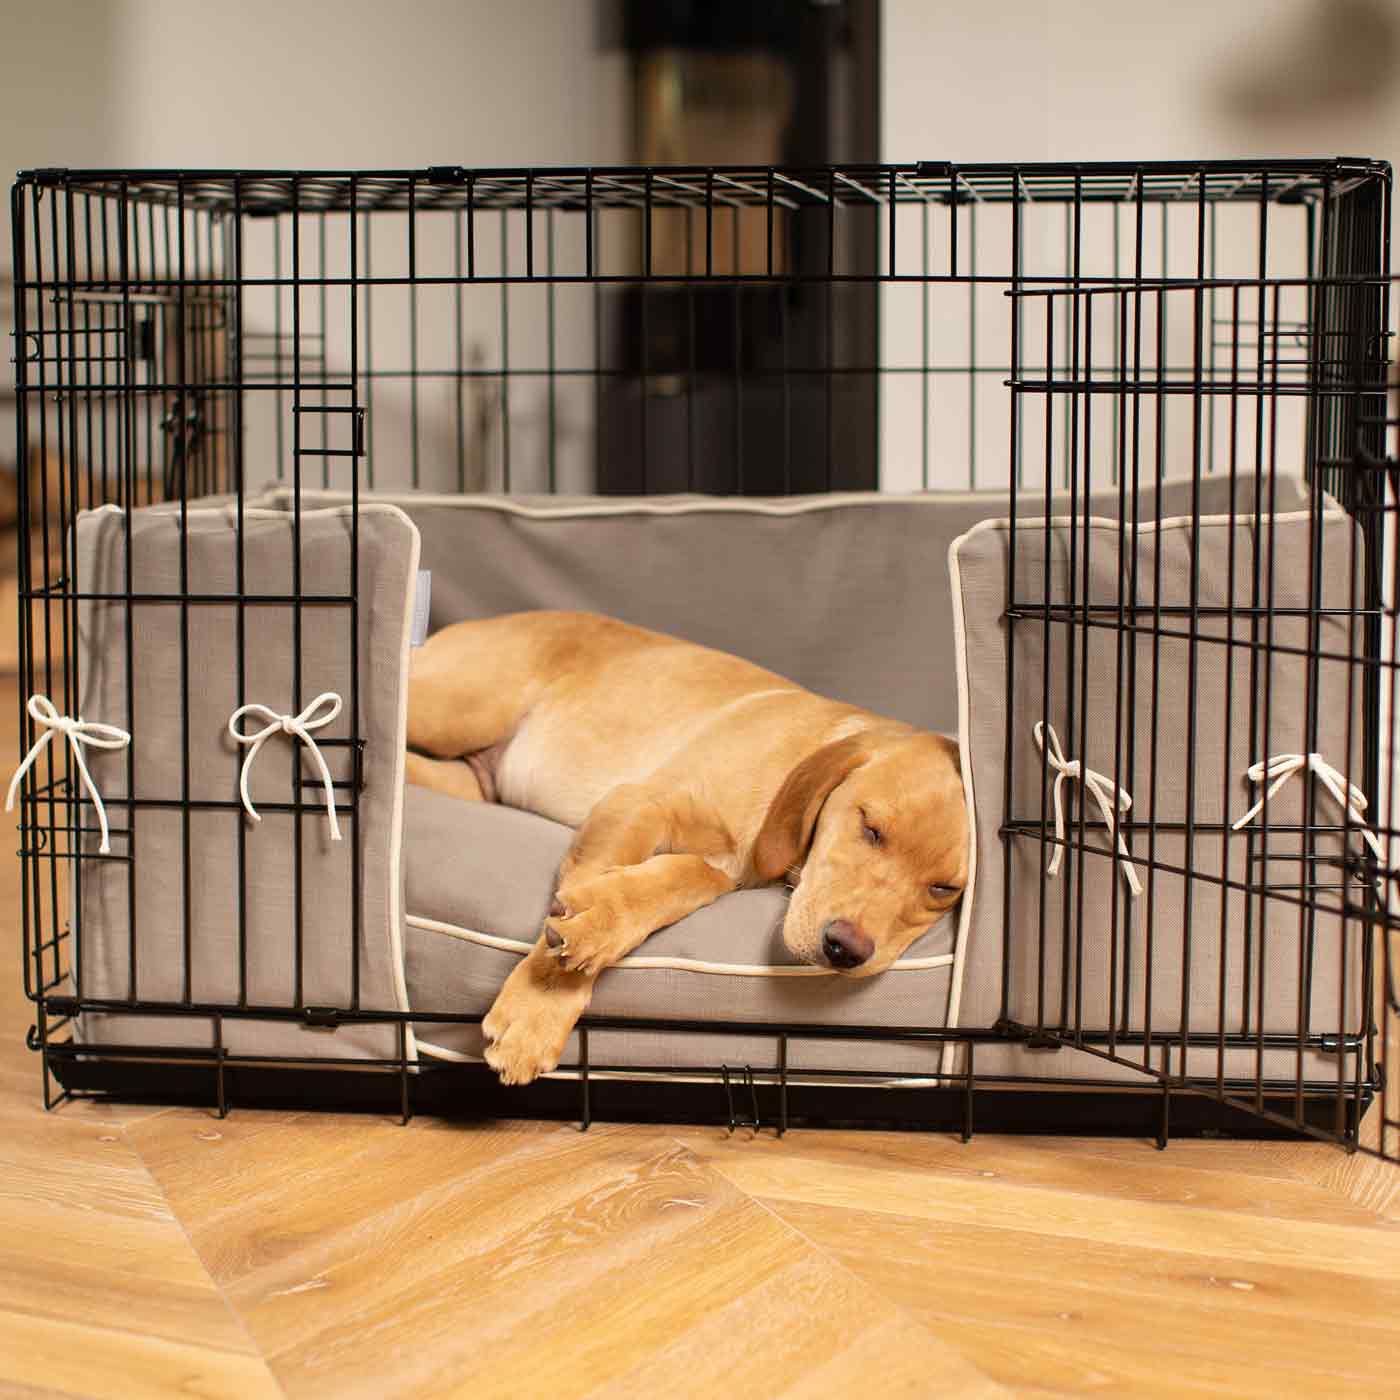 [color:savanna stone] Accessorize your dog cage with our stunning bumper covers, choose from our Savanna collection! Made using luxury fabric for the perfect cage accessory to build the ultimate dog den! Available now in 3 colors and sizes at Lords & Labradors US